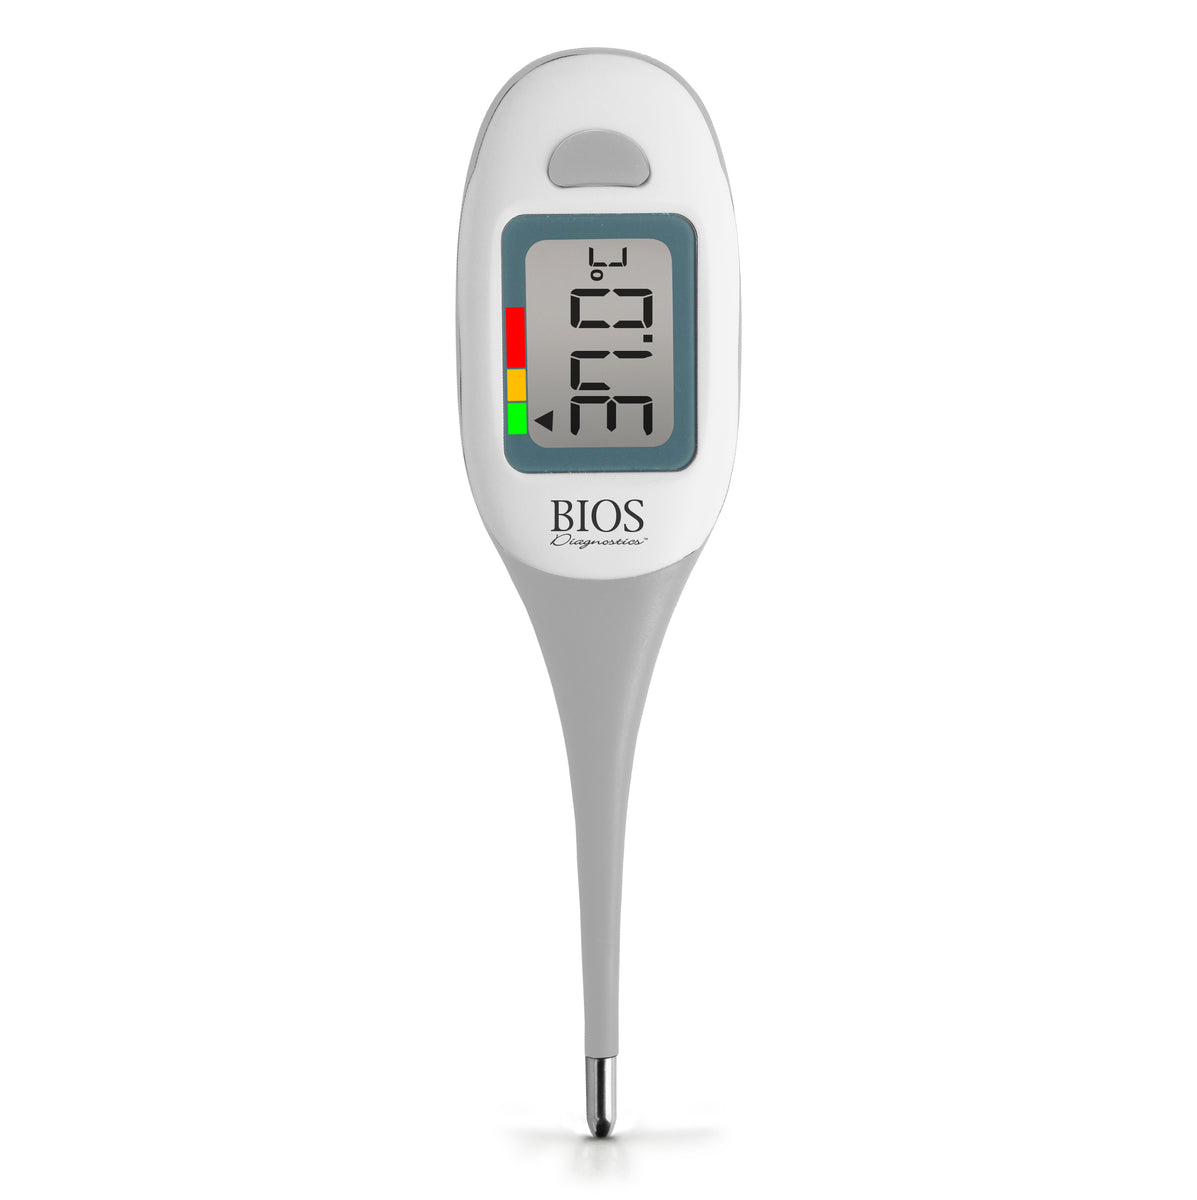 Jumbo, 5 Second Thermometer with Fever Glow – Bios Medical